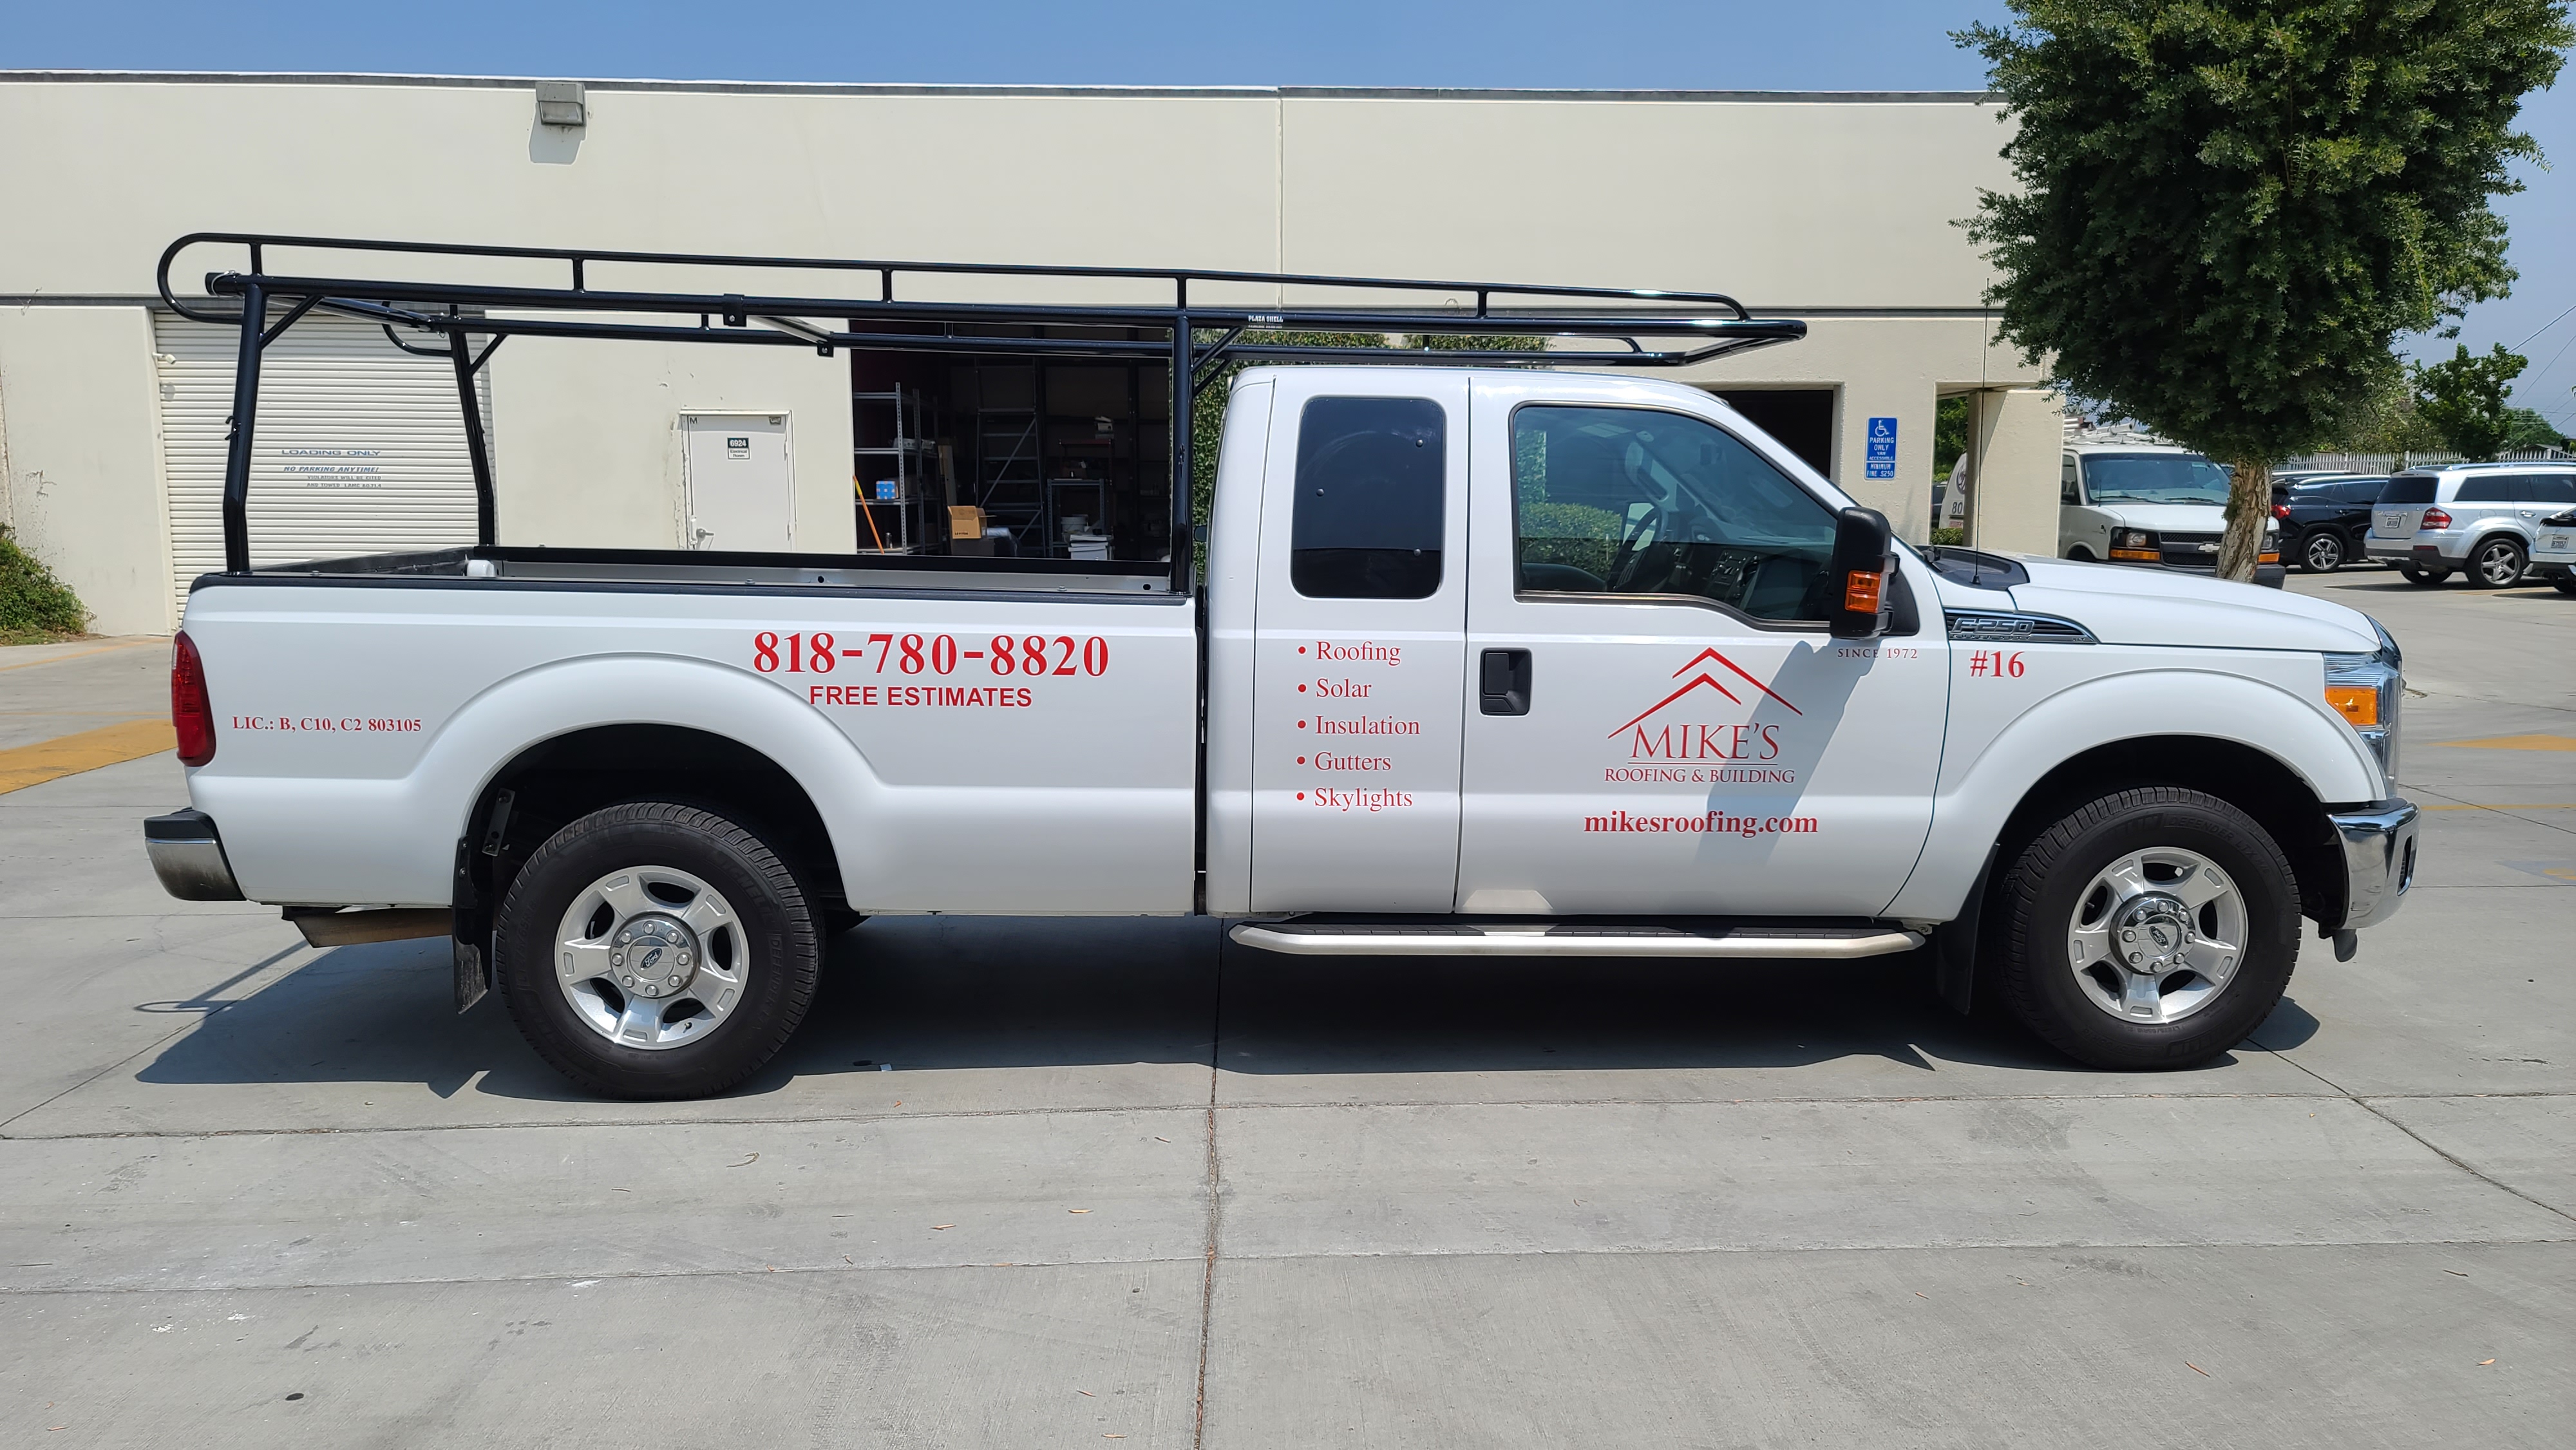 Read more about the article Car Decals for Mike’s Roofing  in Van Nuys